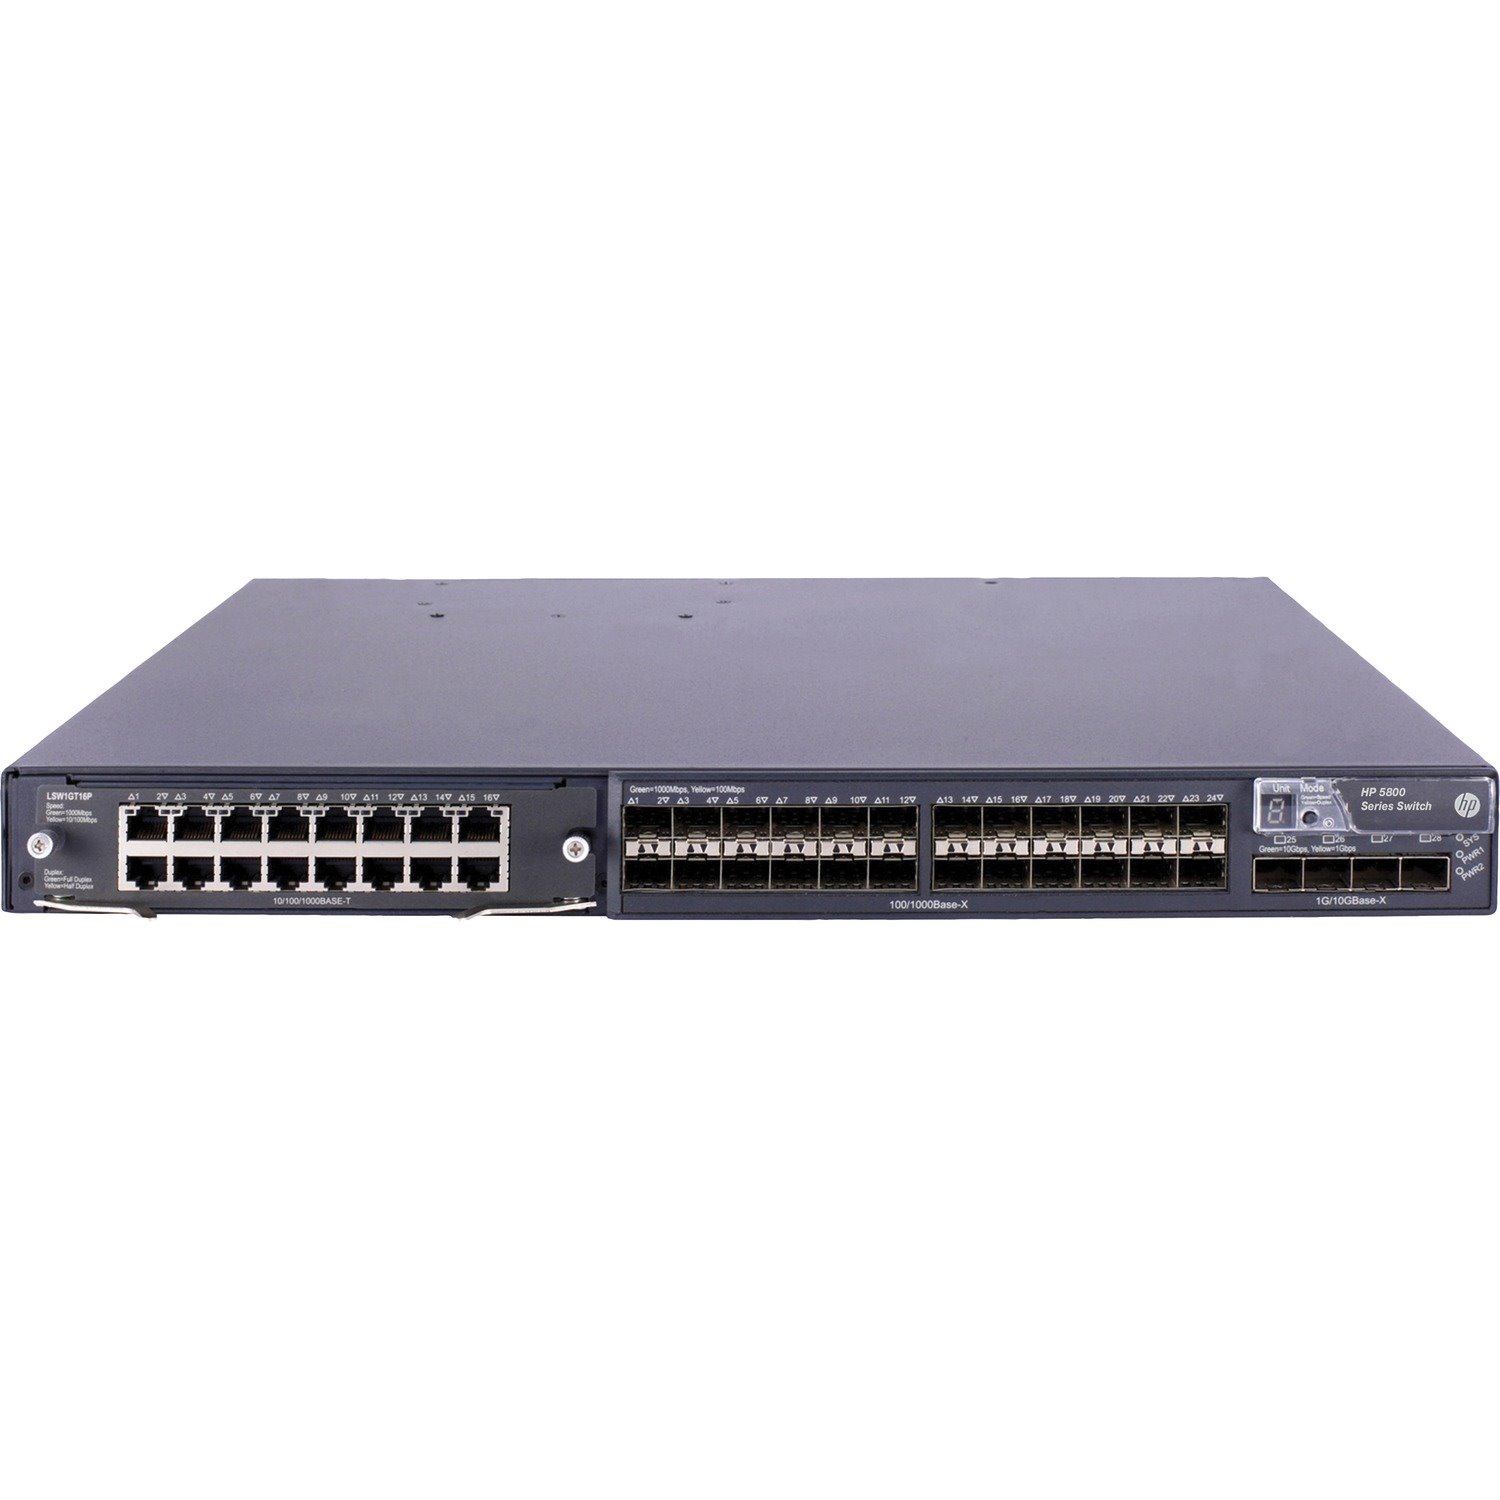 HPE 5800-48G Switch with 1 Interface Slot